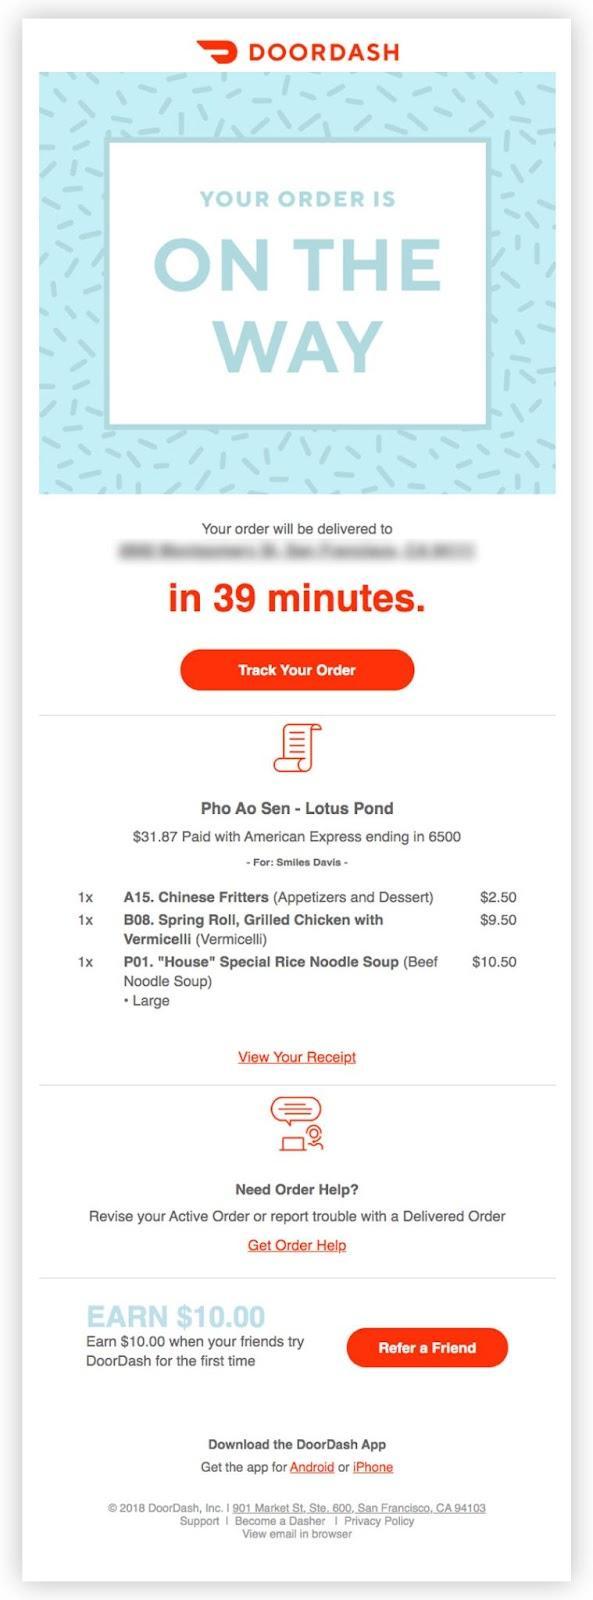 Doordash email regarding when the customers food is expected to arrive 